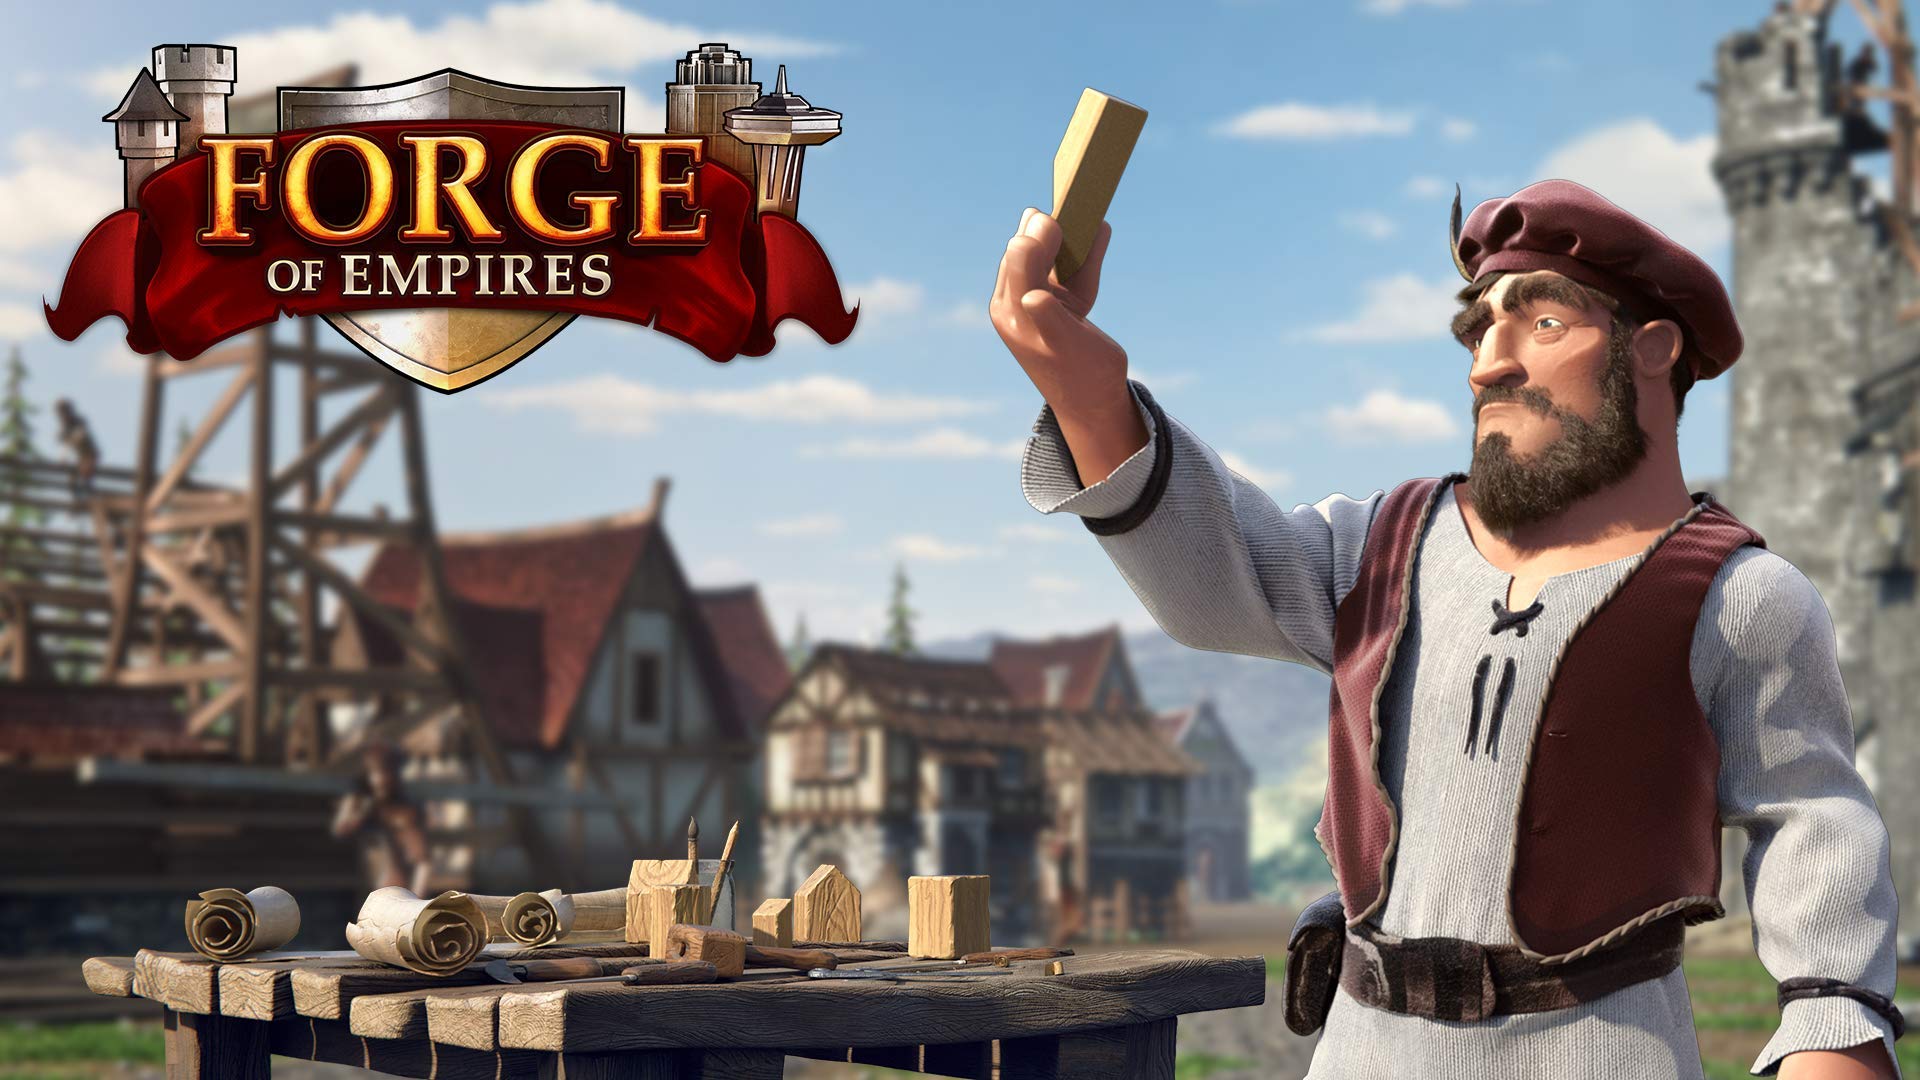 Forge of Empires is it worth playing